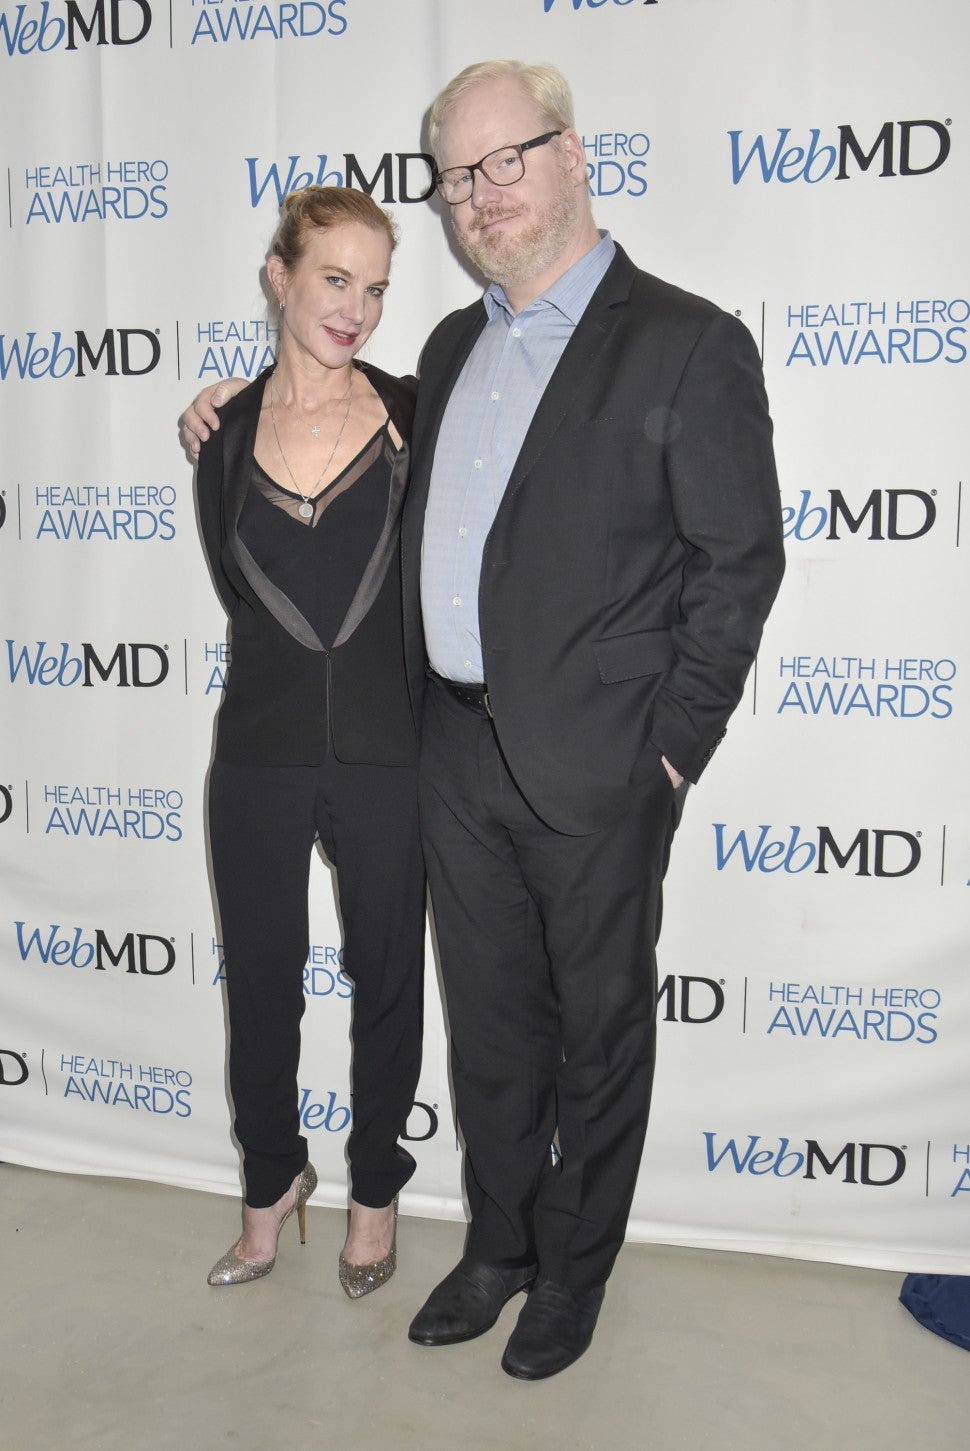 Jim and Jeannie Gaffigan at WebMD awards